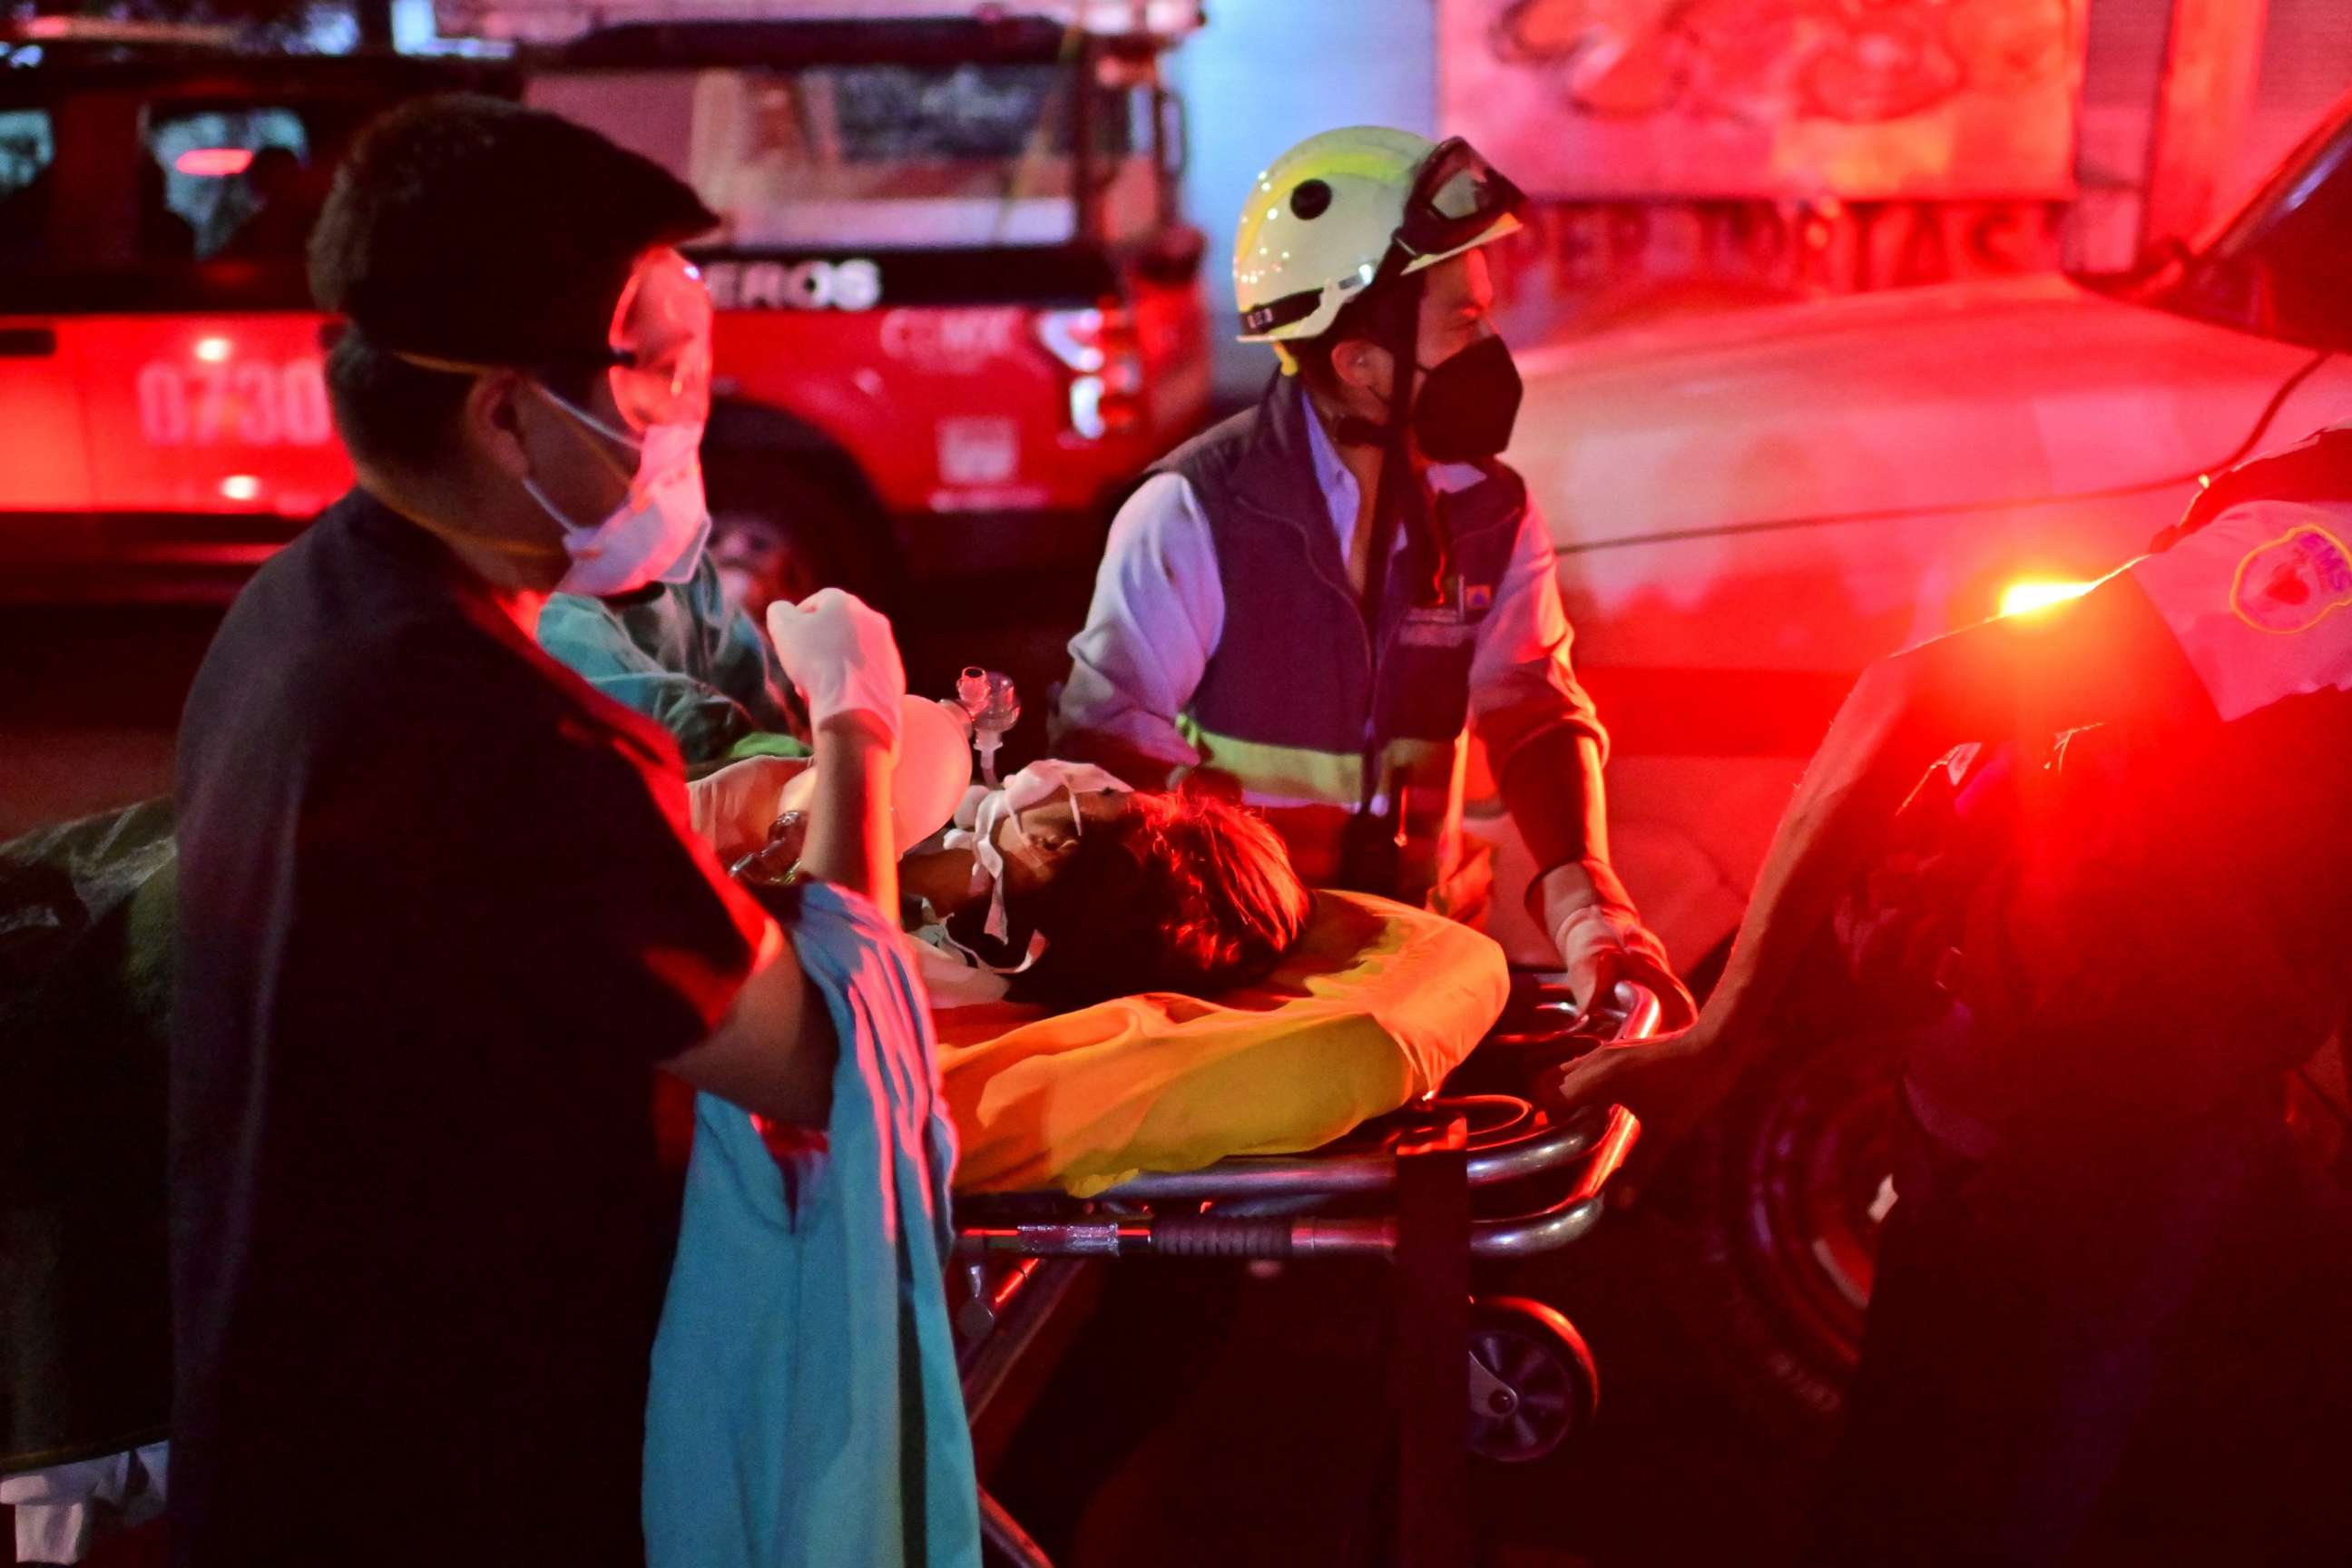 PHOTO: Emergency workers move an injured person on a stretcher at the site of an accident in Mexico City, Mexico, on May 4, 2021, after an elevated metro line collapsed.